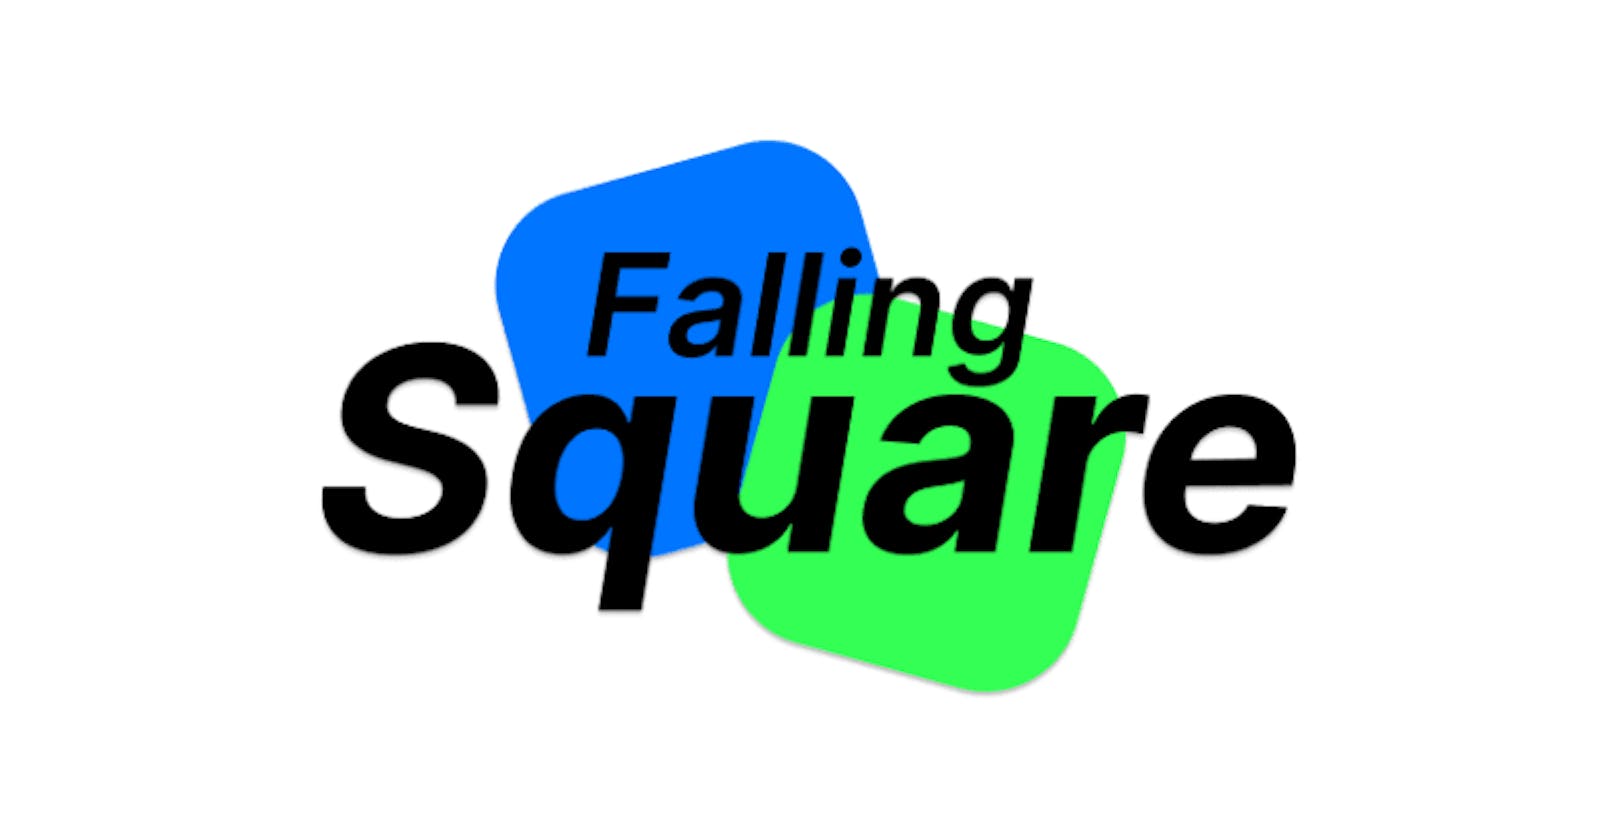 Join the beta test for Falling Square on iOS